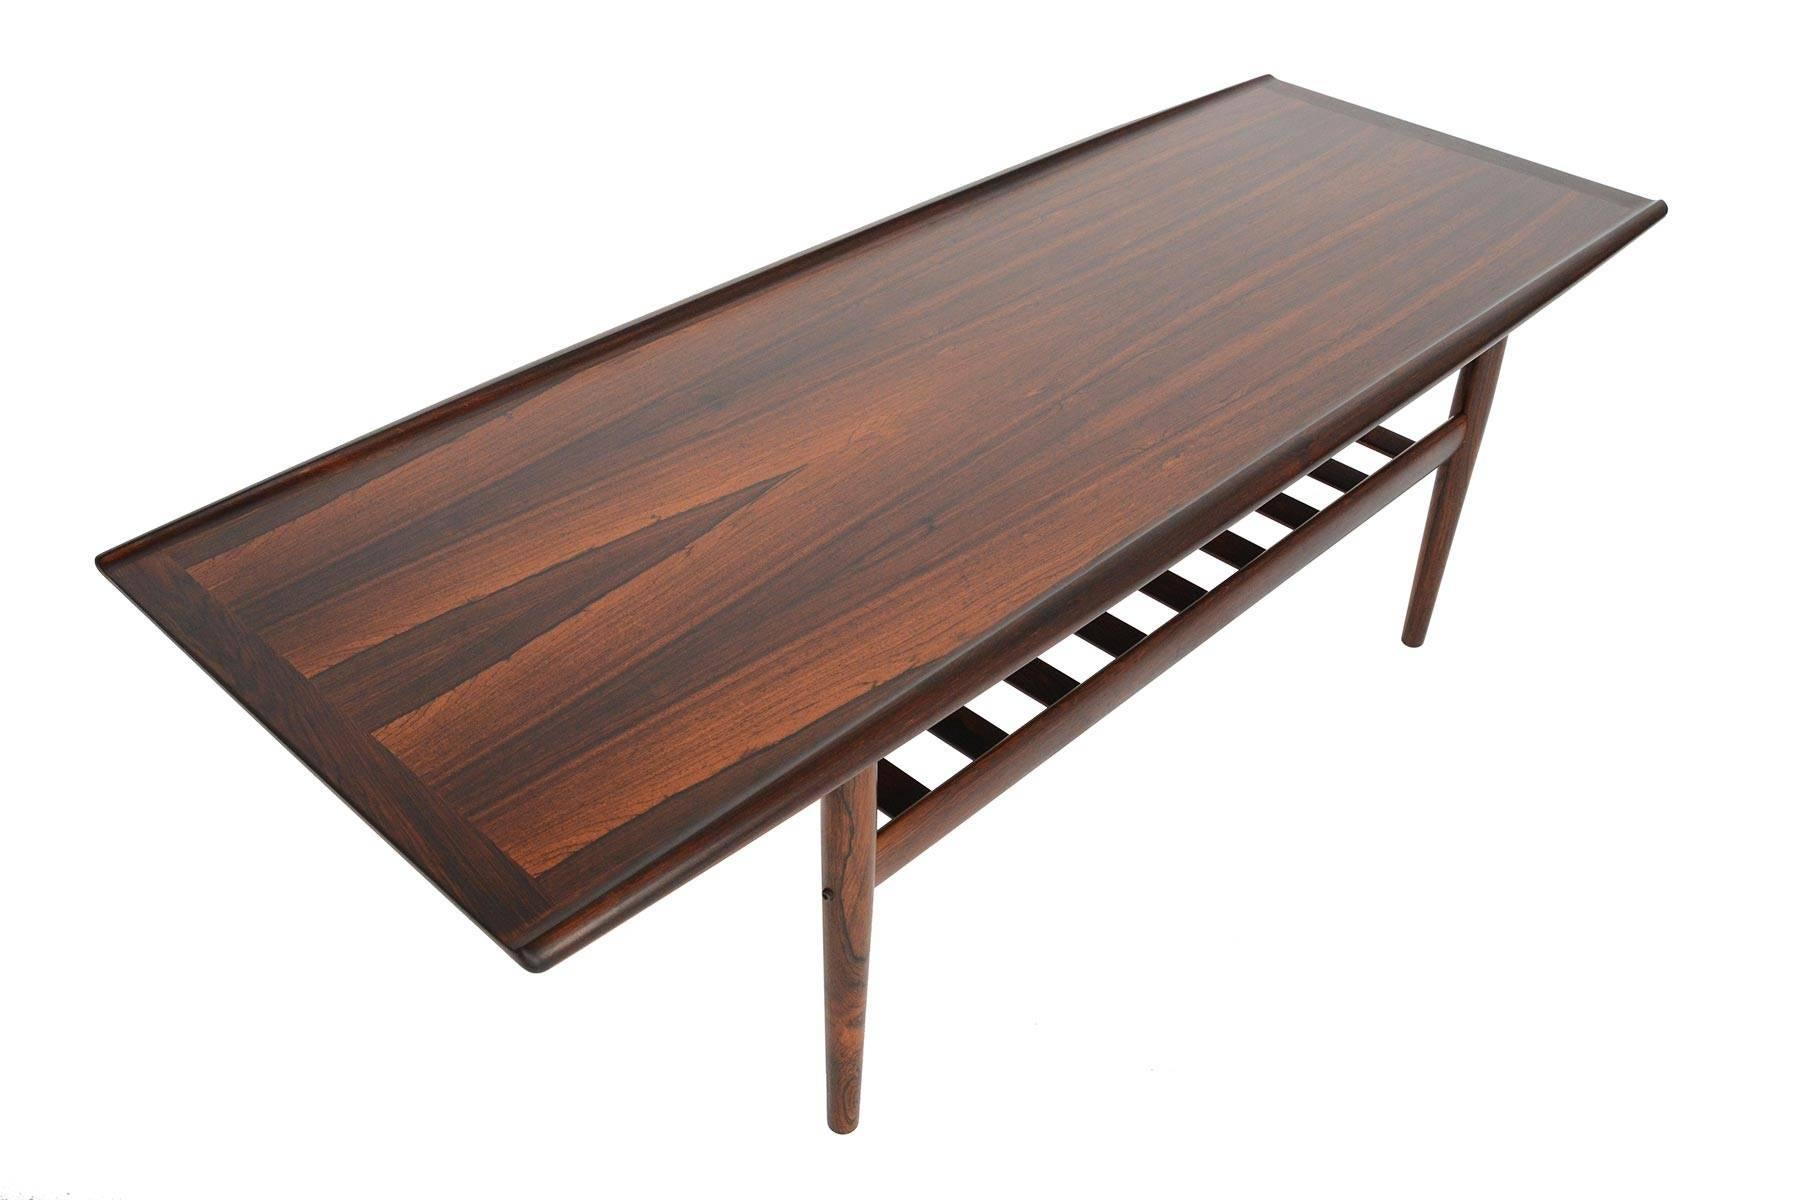 This elegant Danish modern surfboard coffee table was designed by Grete Jalk for Glostrup Mobelfabrik in the 1960s. Beautiful book-match veneer is flanked by raised lips. A lower rack offers storage. Recently refinished and in excellent condition.